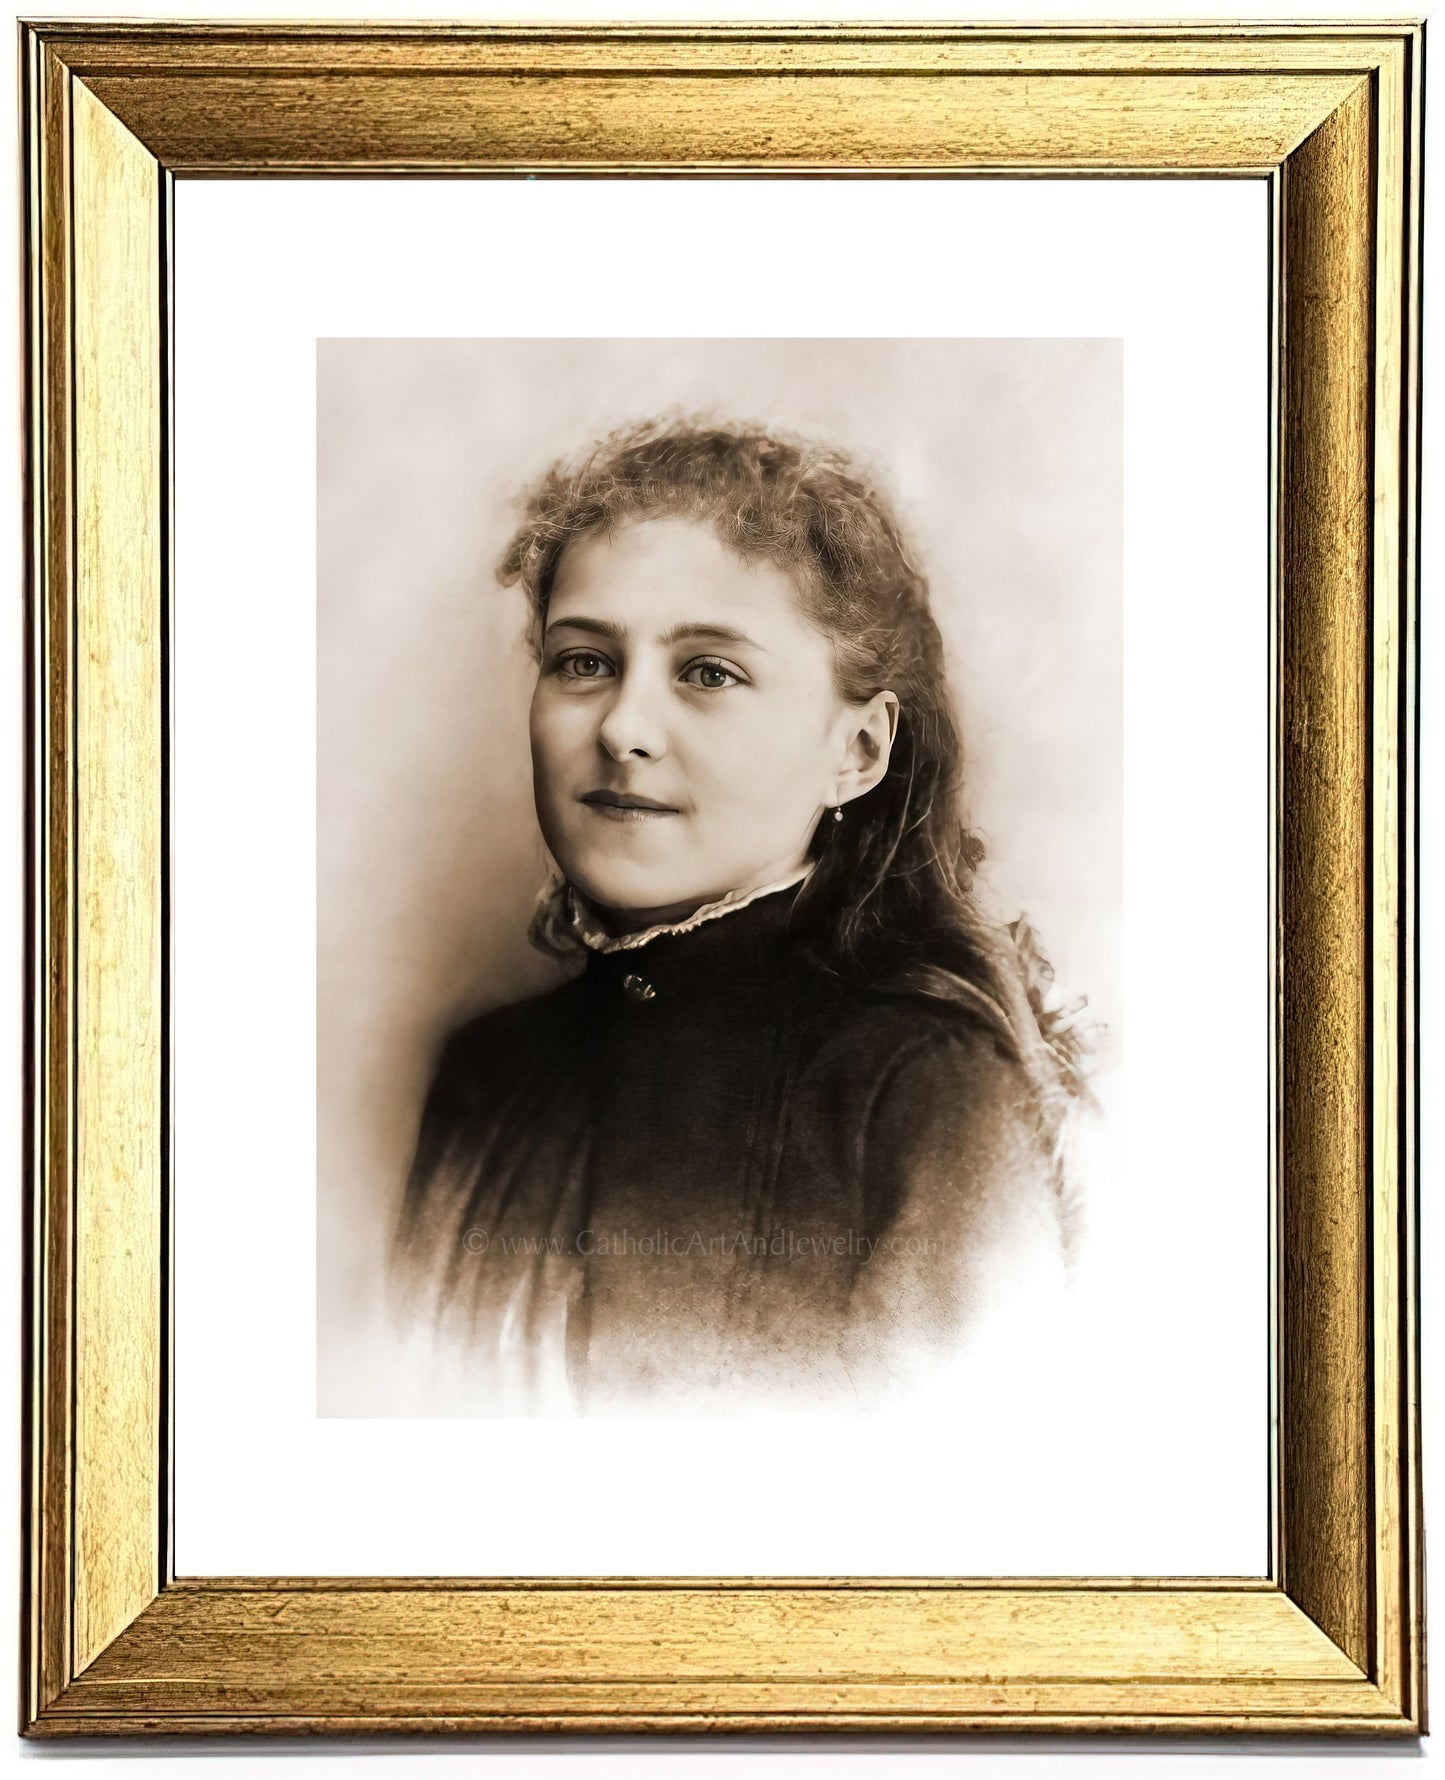 St. Therese – Exclusive Restoration! – Vivid Photo – 2 Sizes – "The Little Queen" – St. Therese of Lisieux – Saint Theresa